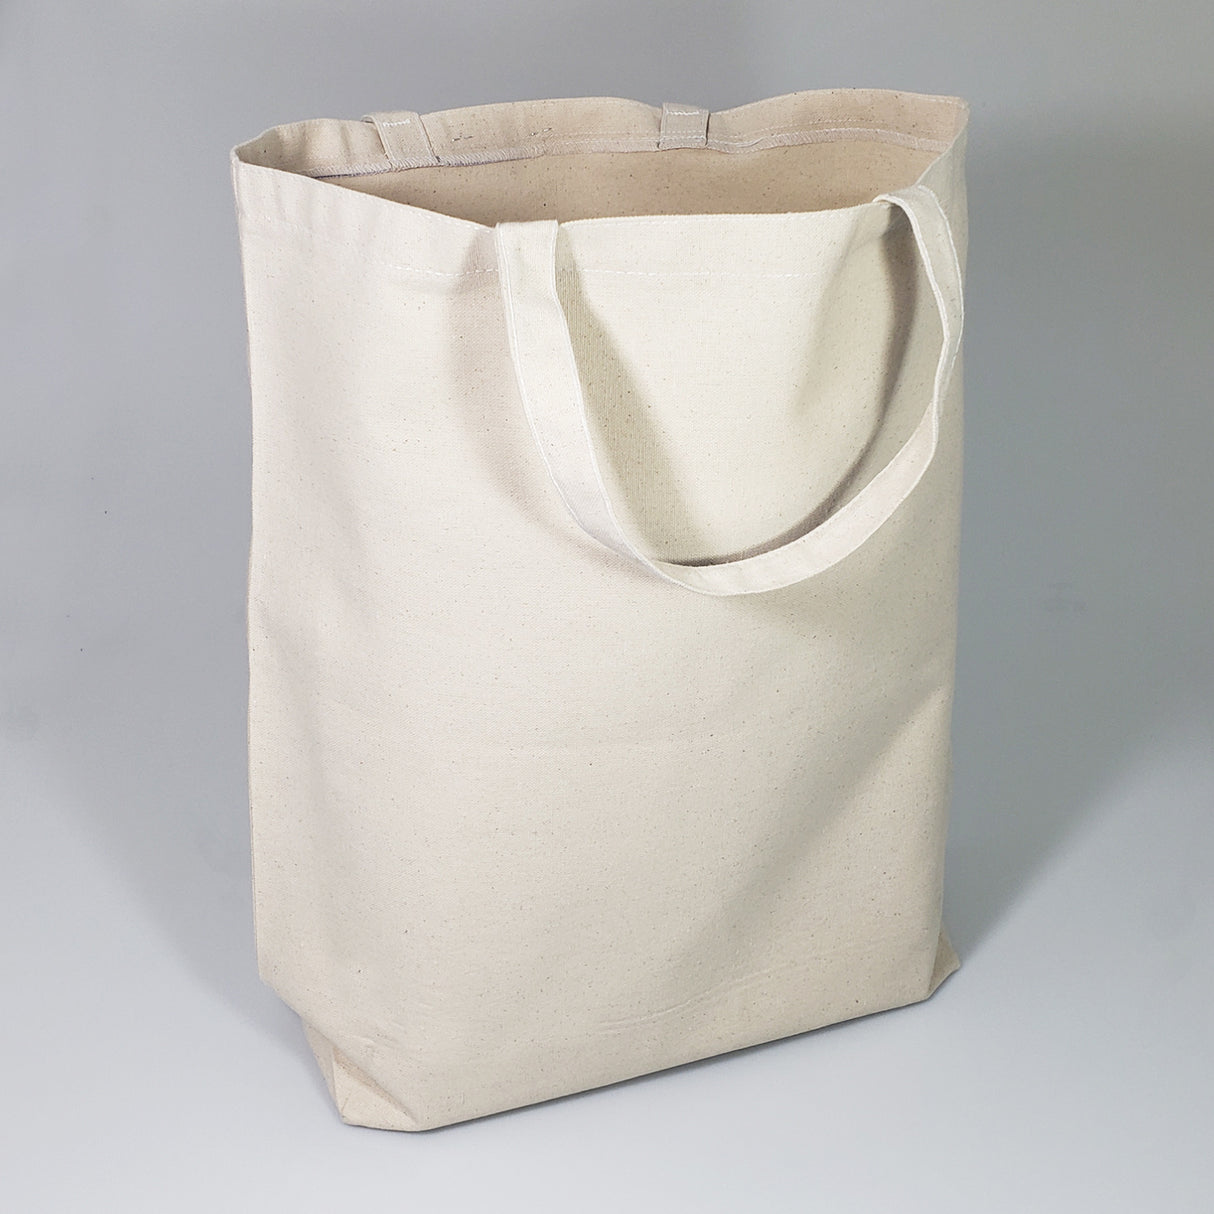 Oversized Canvas Tote Bag - Made in USA